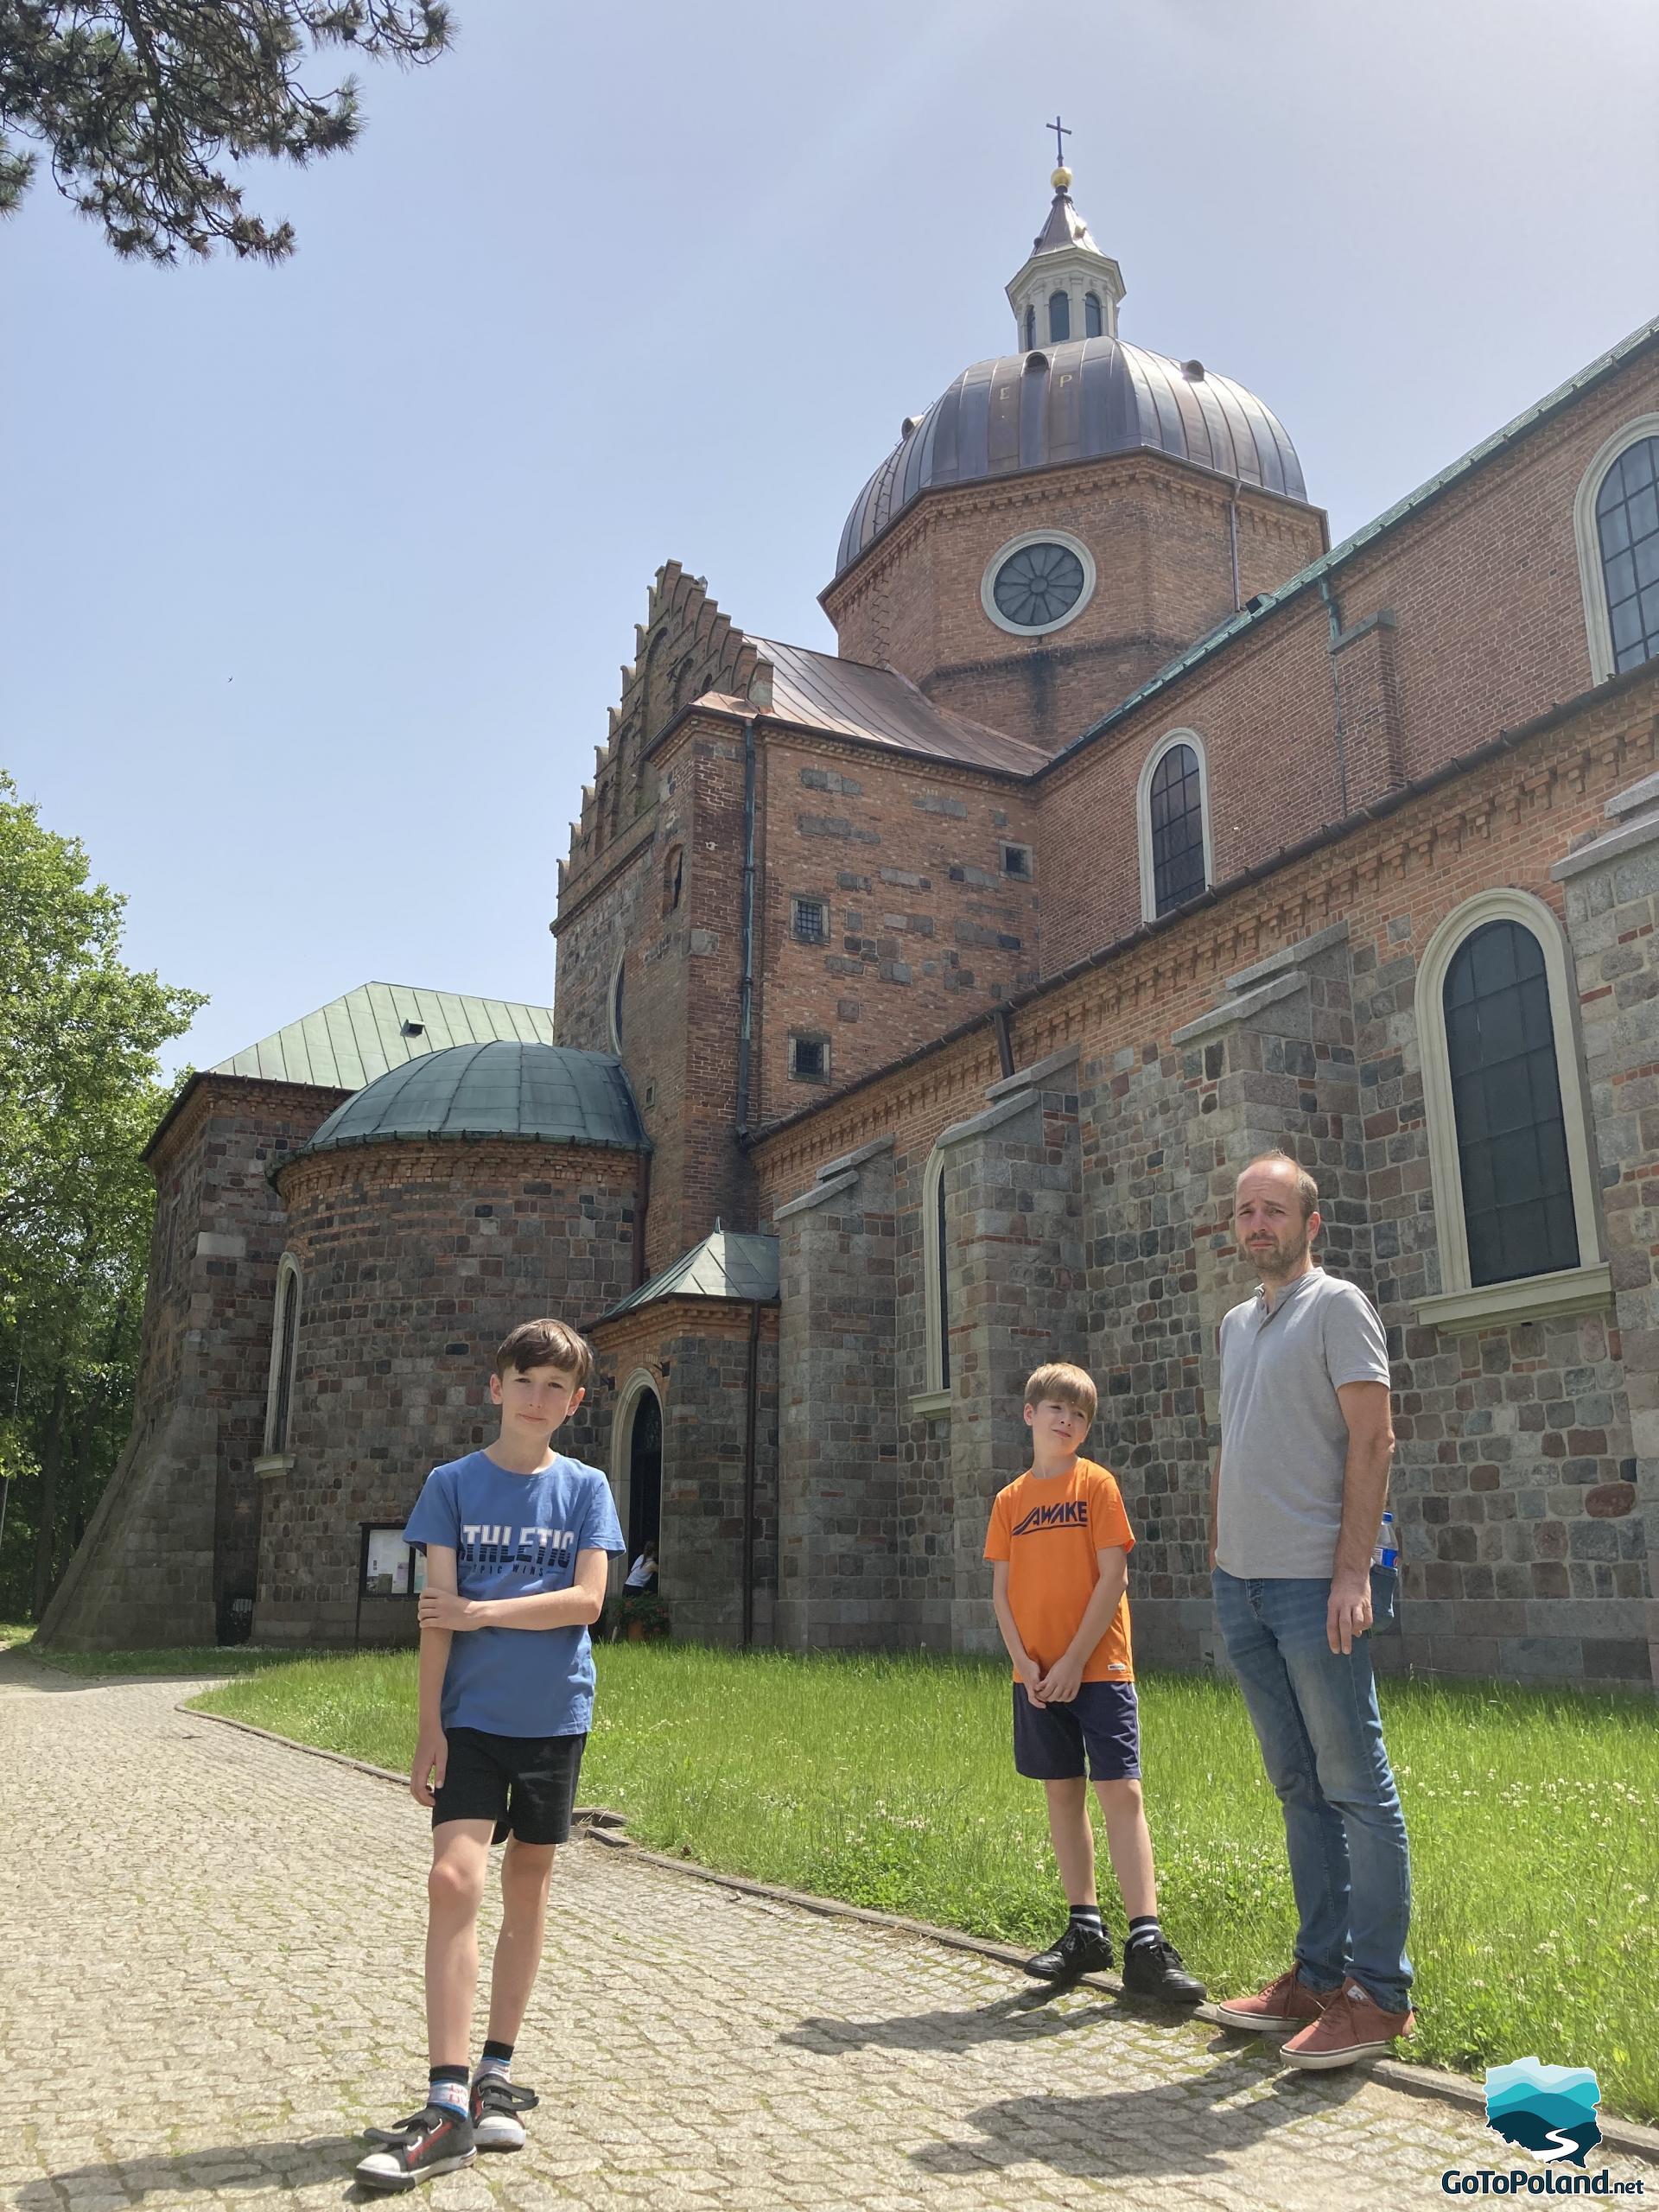 A man and two young boys standing next to the church